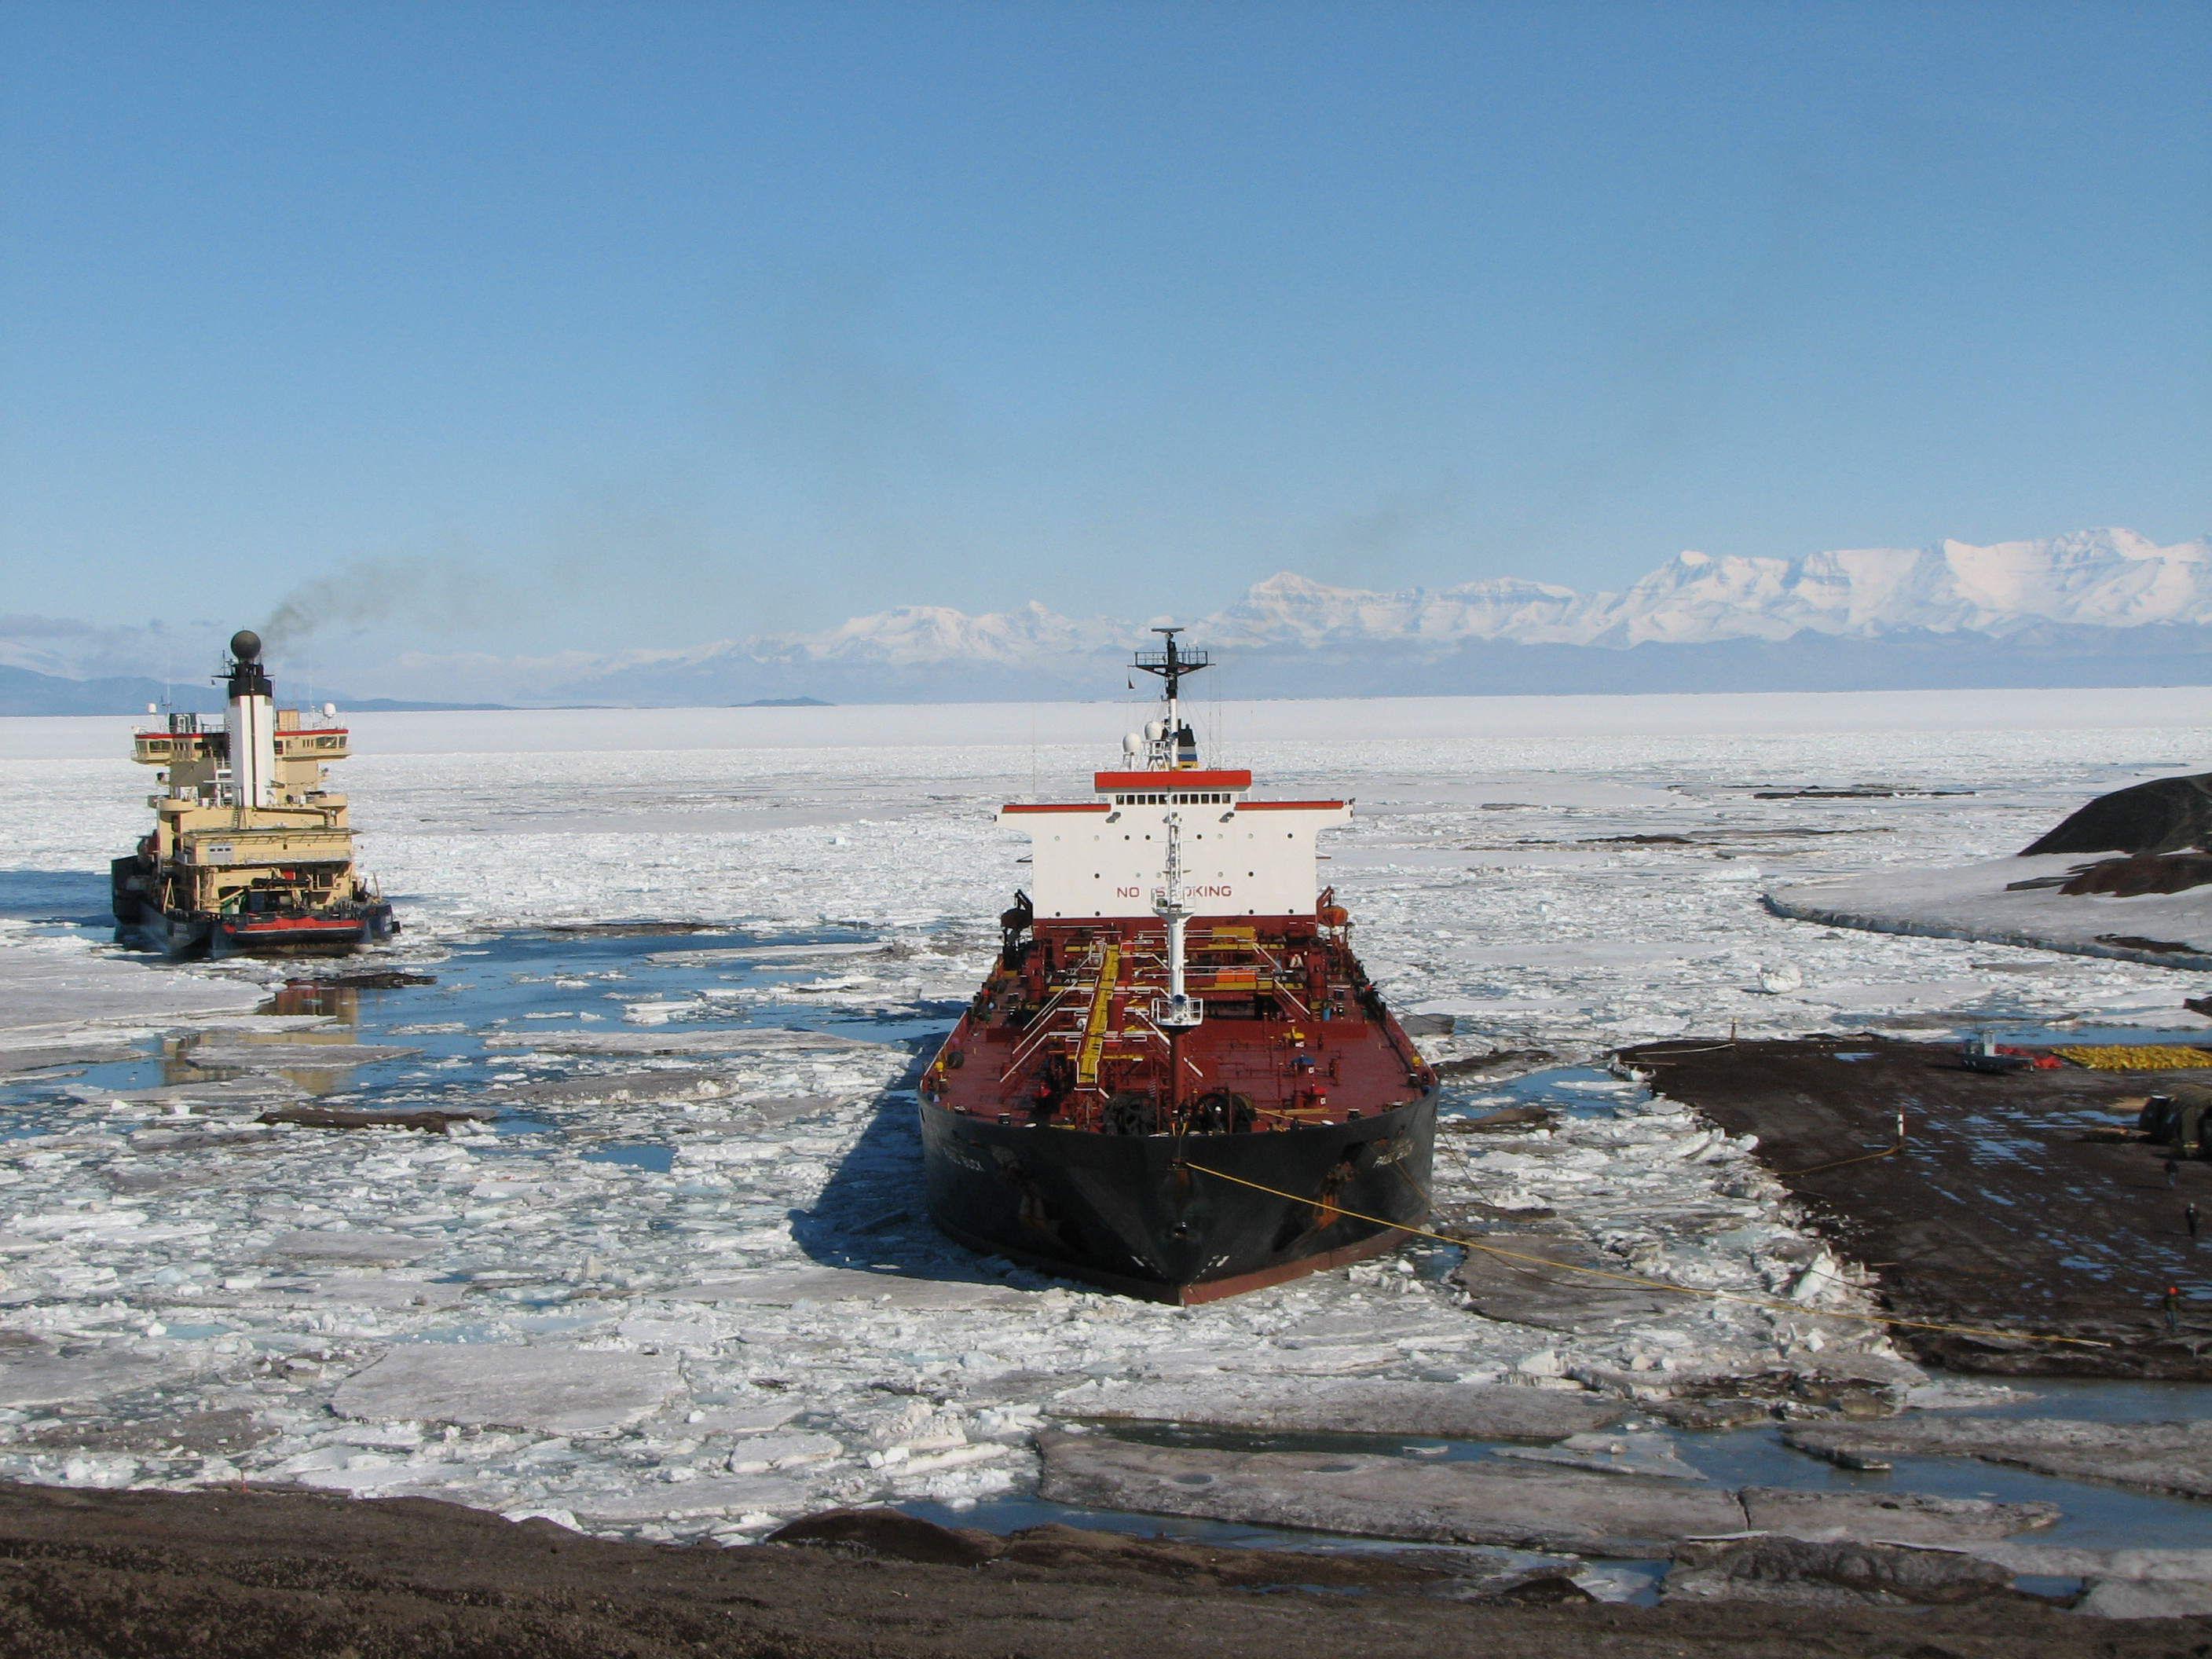 Two ships in icy water.